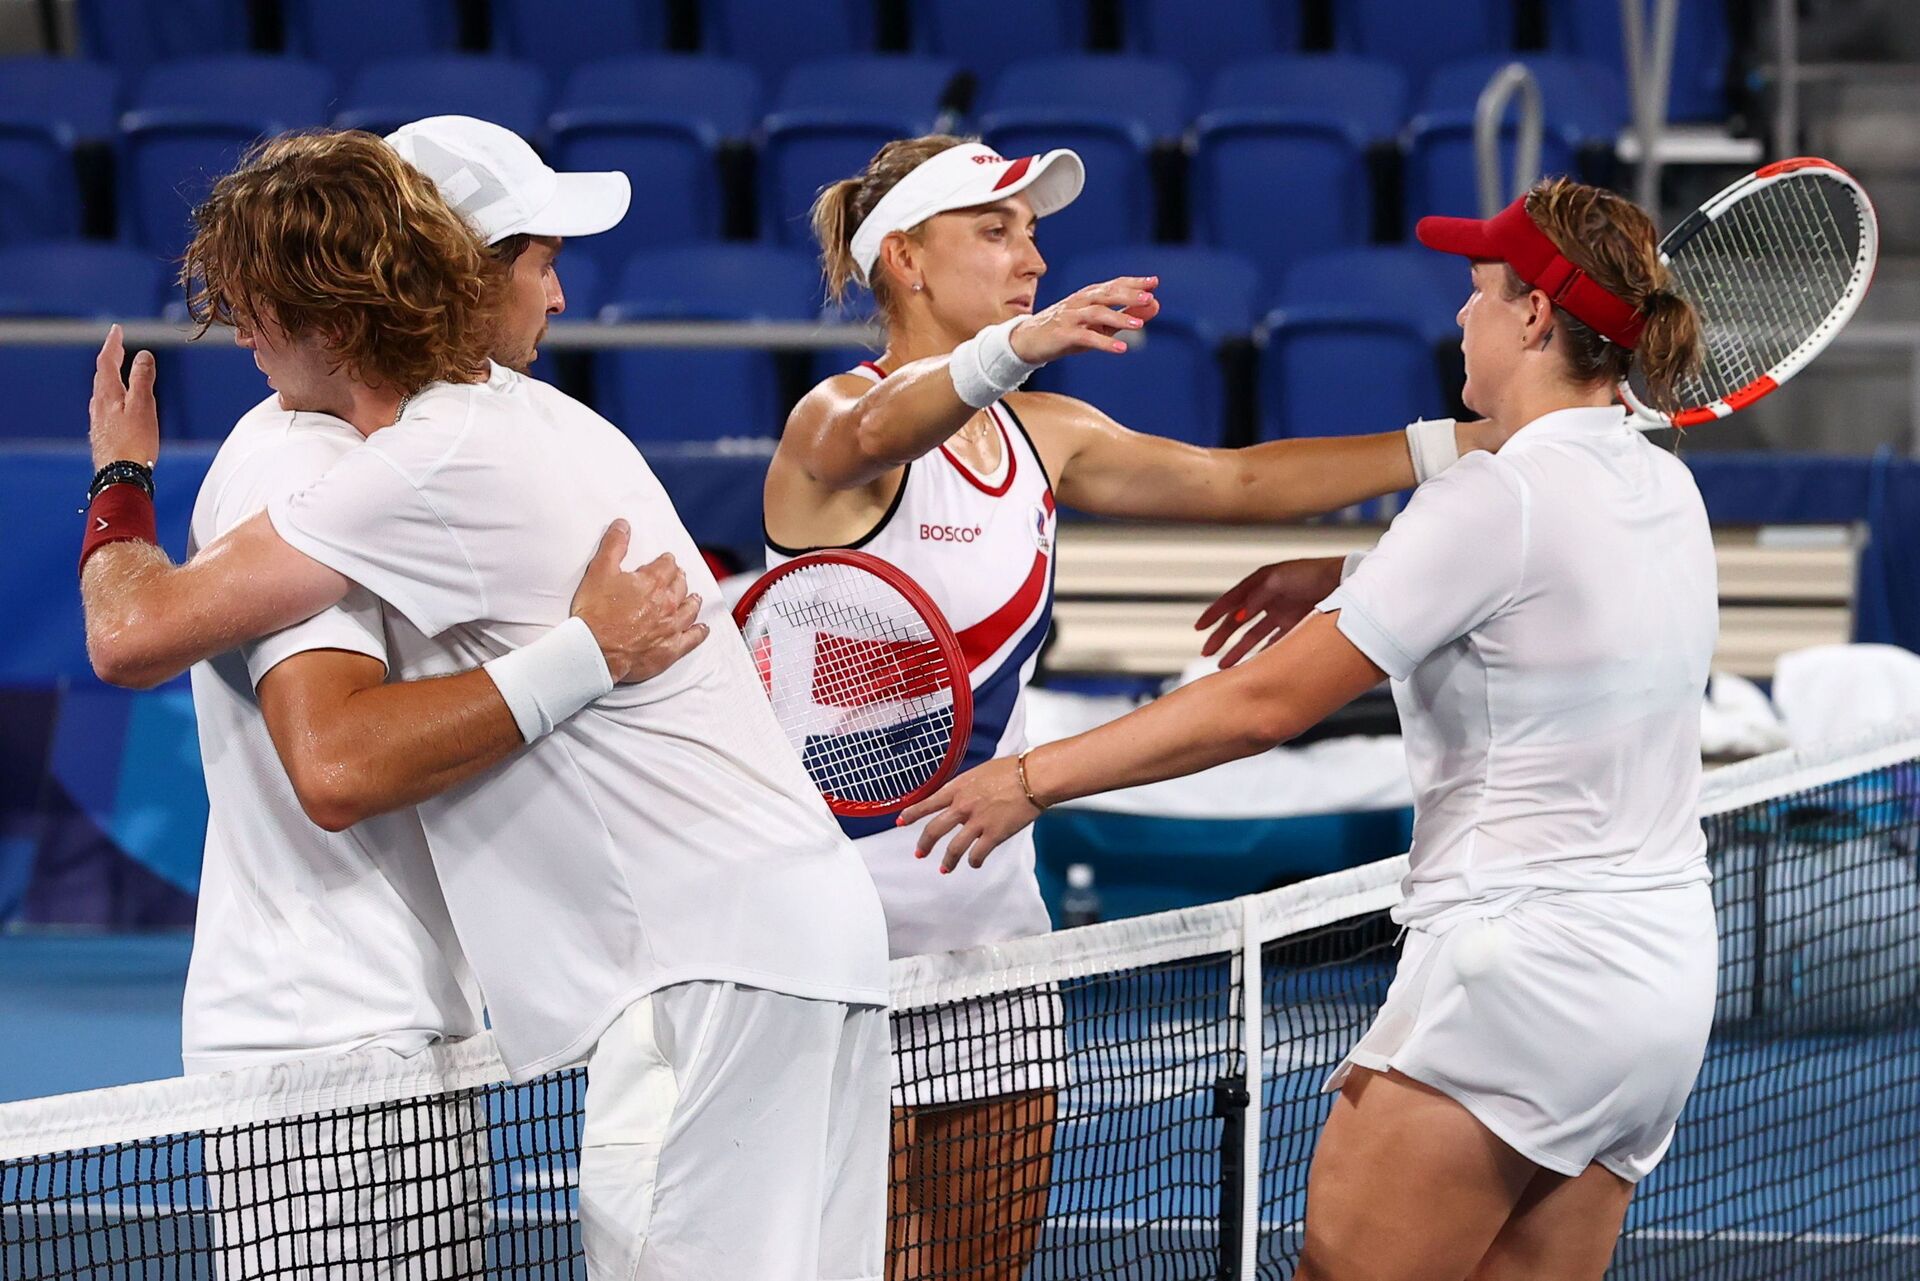 Tokyo 2020 Olympics - Tennis - Mixed Doubles - Gold medal match - Ariake Tennis Park - Tokyo, Japan - August 1, 2021. Anastasia Pavlyuchenkova and Andrey Rublev of the Russian Olympic Committee with Elena Vesnina and Aslan Karatsev of the Russian Olympic Committee after winning their gold medal match REUTERS/Edgar Su - Sputnik International, 1920, 07.09.2021